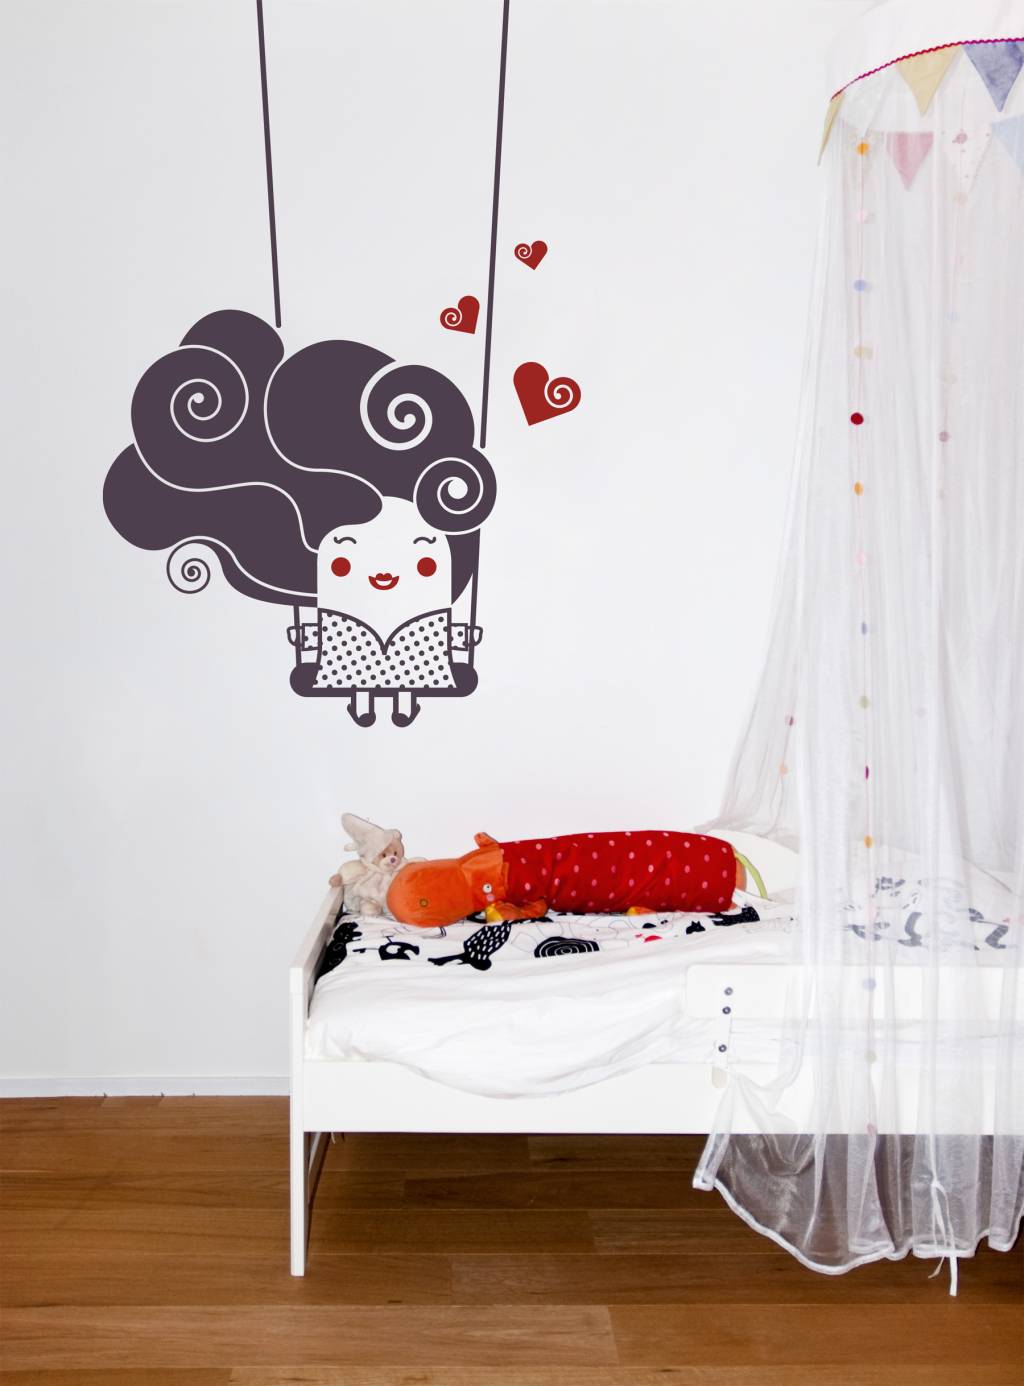 Uniqeu Wall Stickers  Ideas for Your Home HOME INSPIRATIONS